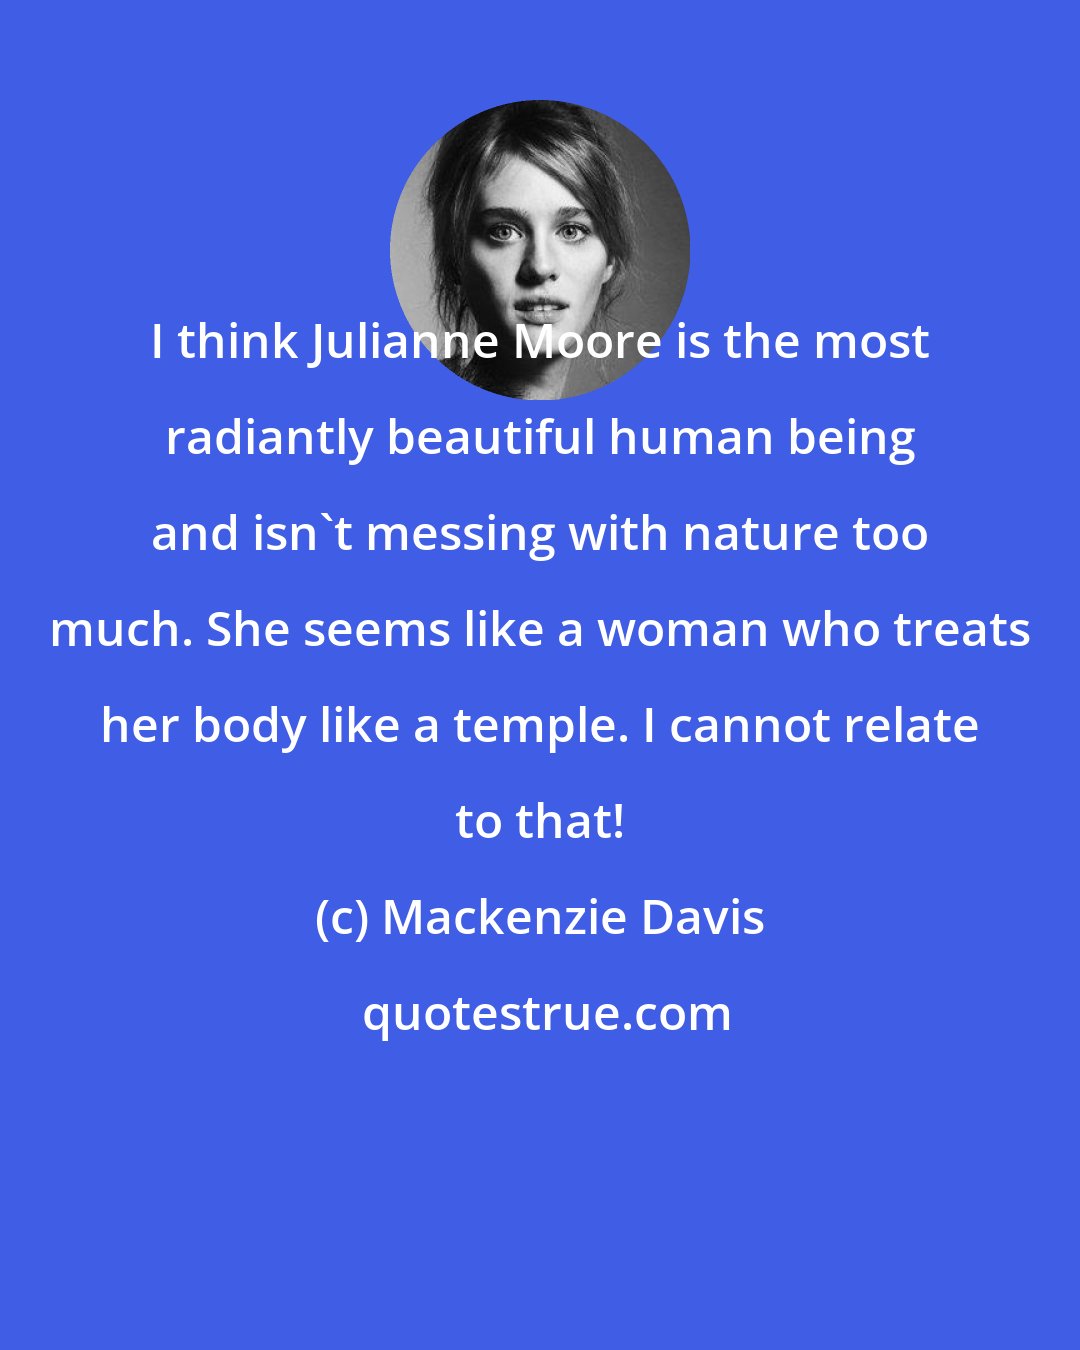 Mackenzie Davis: I think Julianne Moore is the most radiantly beautiful human being and isn't messing with nature too much. She seems like a woman who treats her body like a temple. I cannot relate to that!